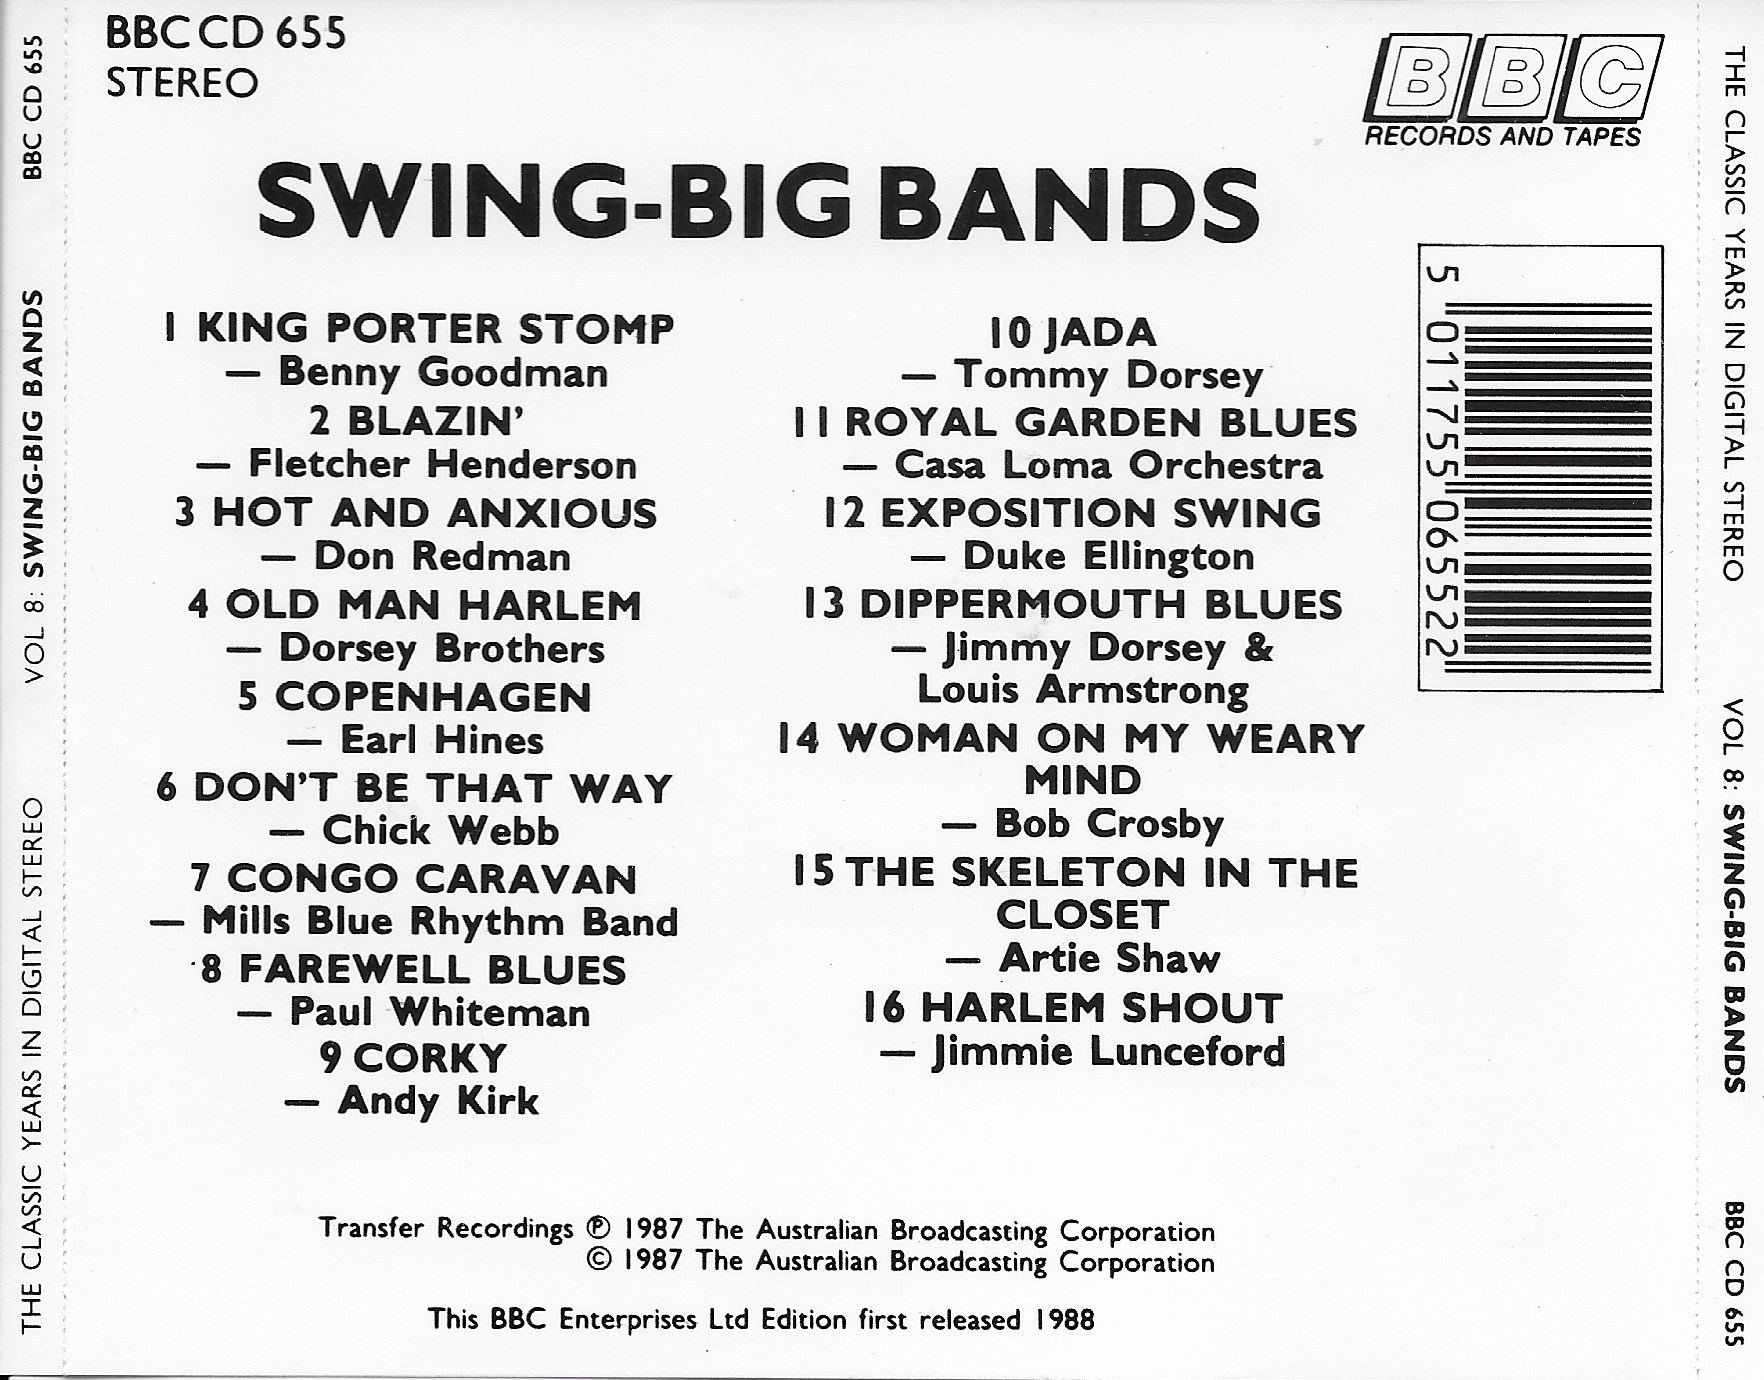 Back cover of BBCCD655